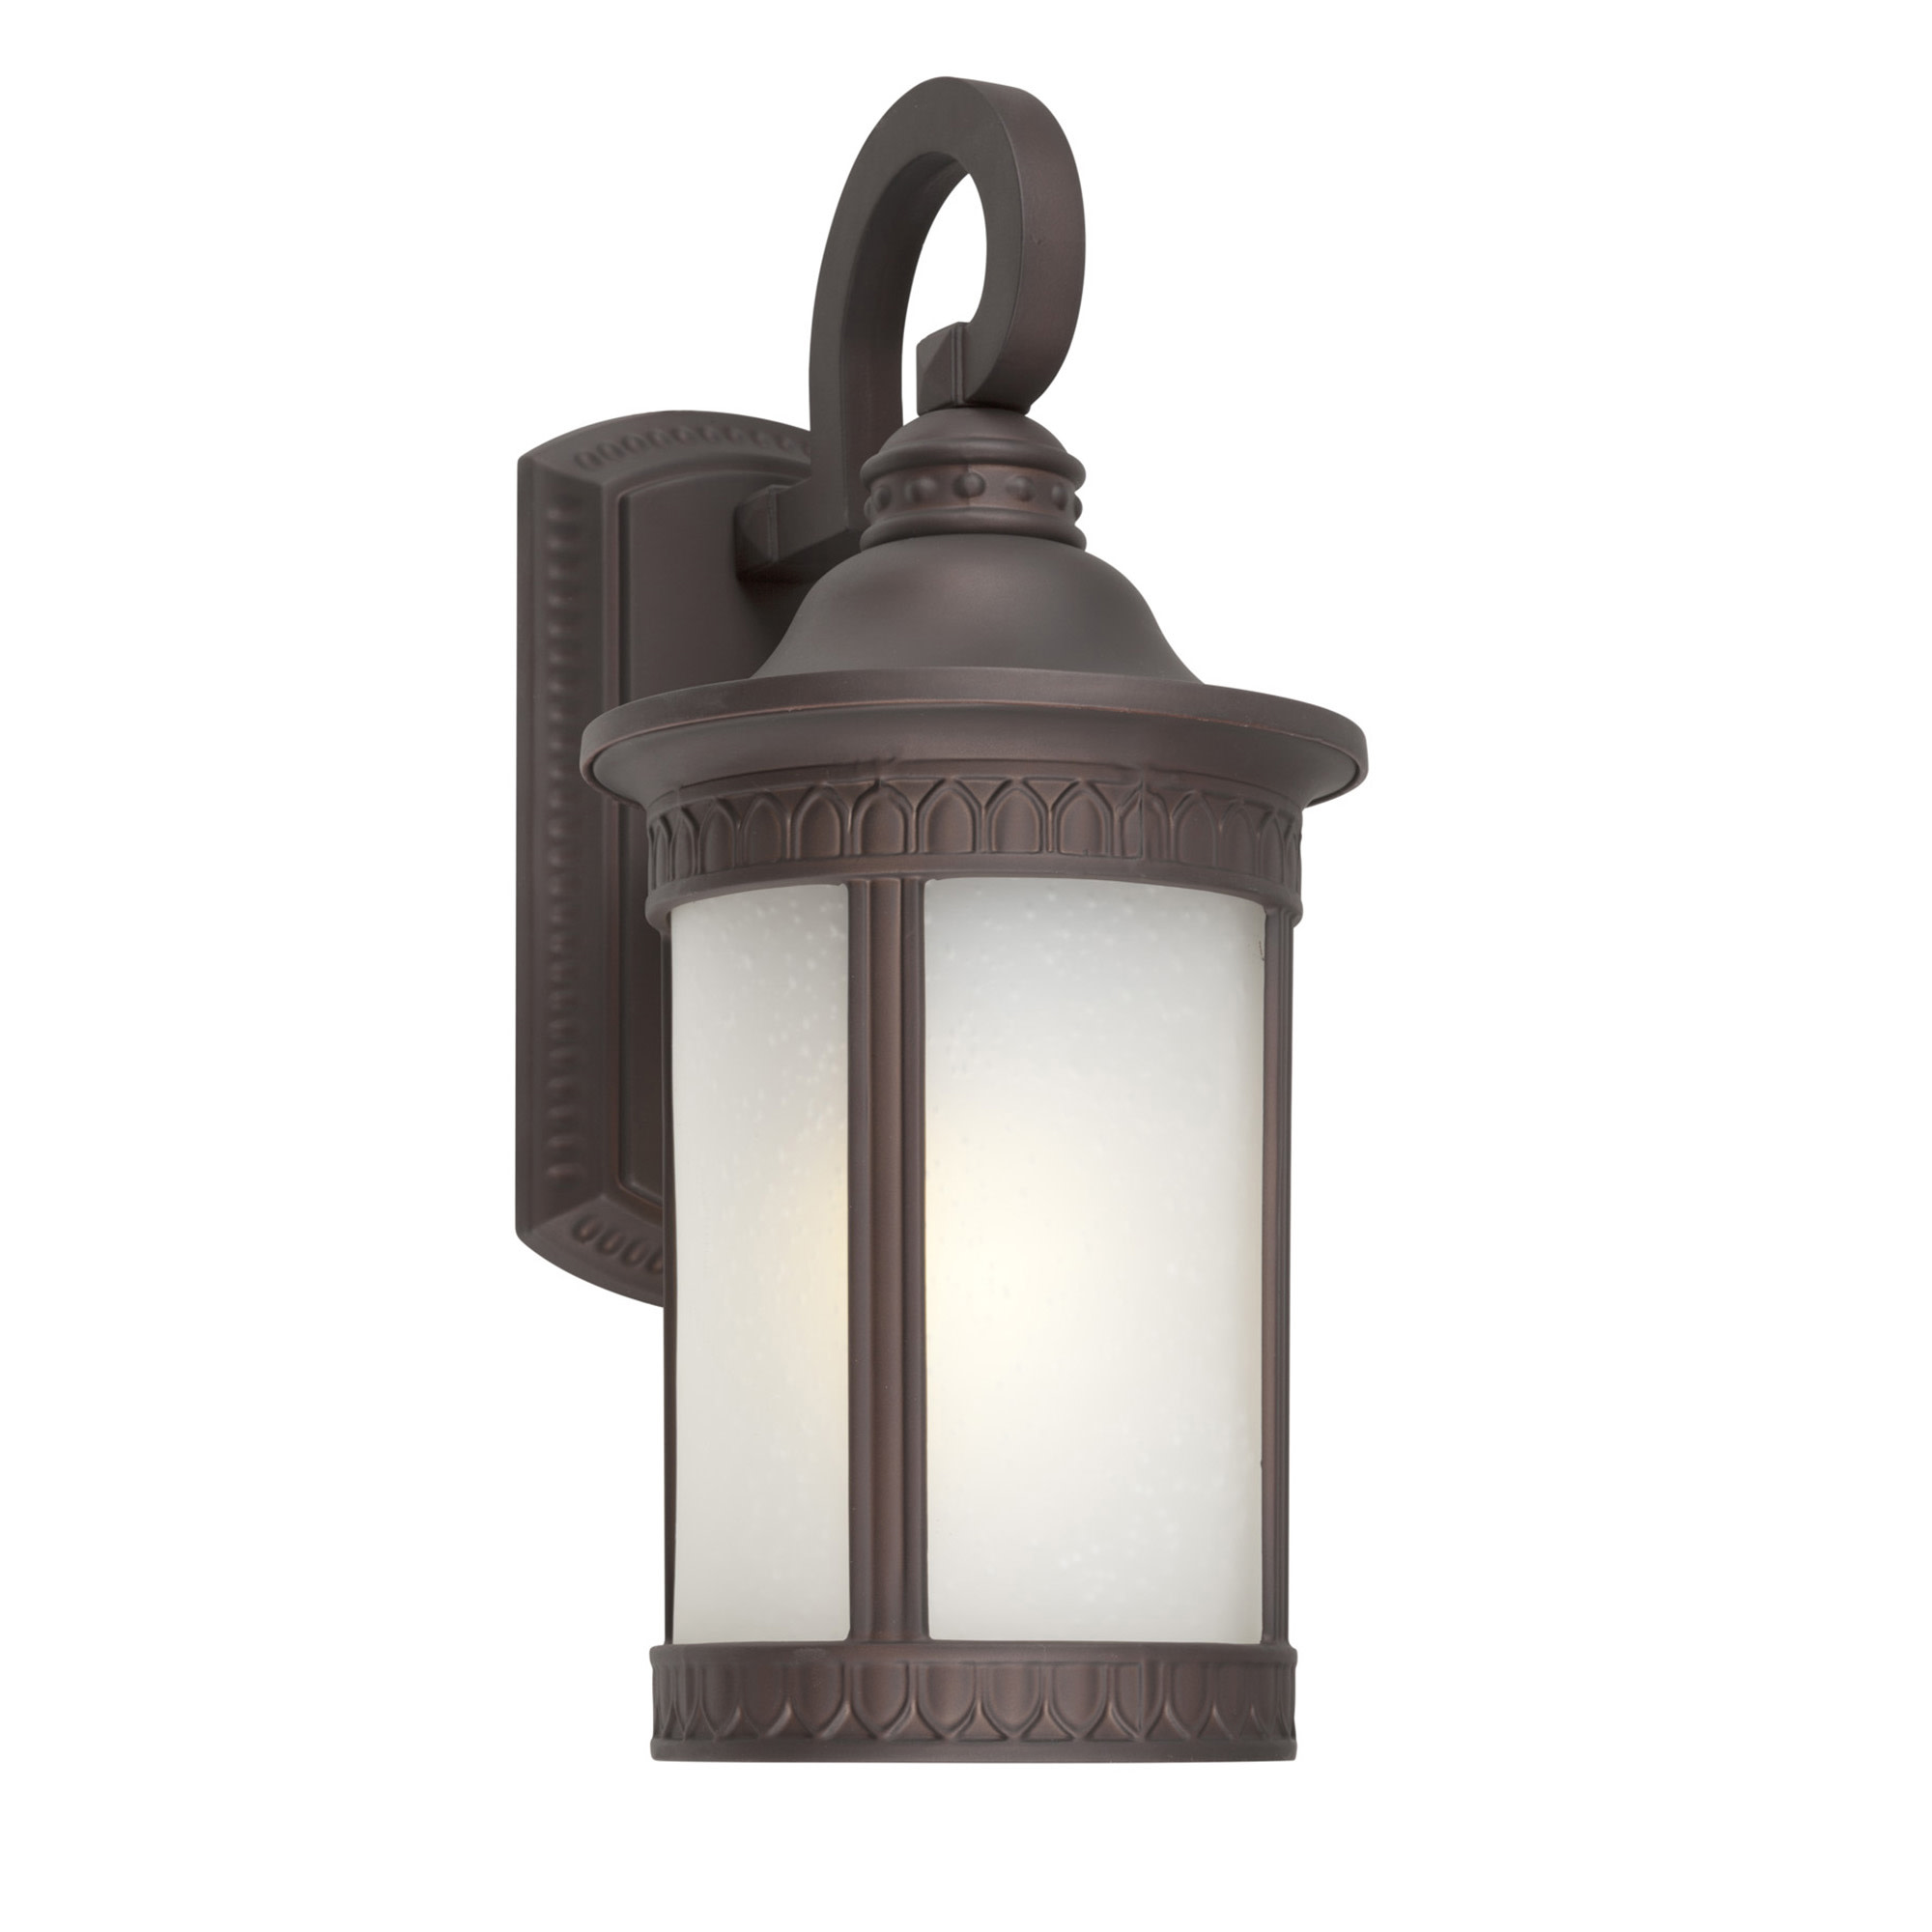 Forte Lighting 17022-01 1 Light 16" Tall Outdoor Wall Sconce - Painted Rust - image 3 of 3